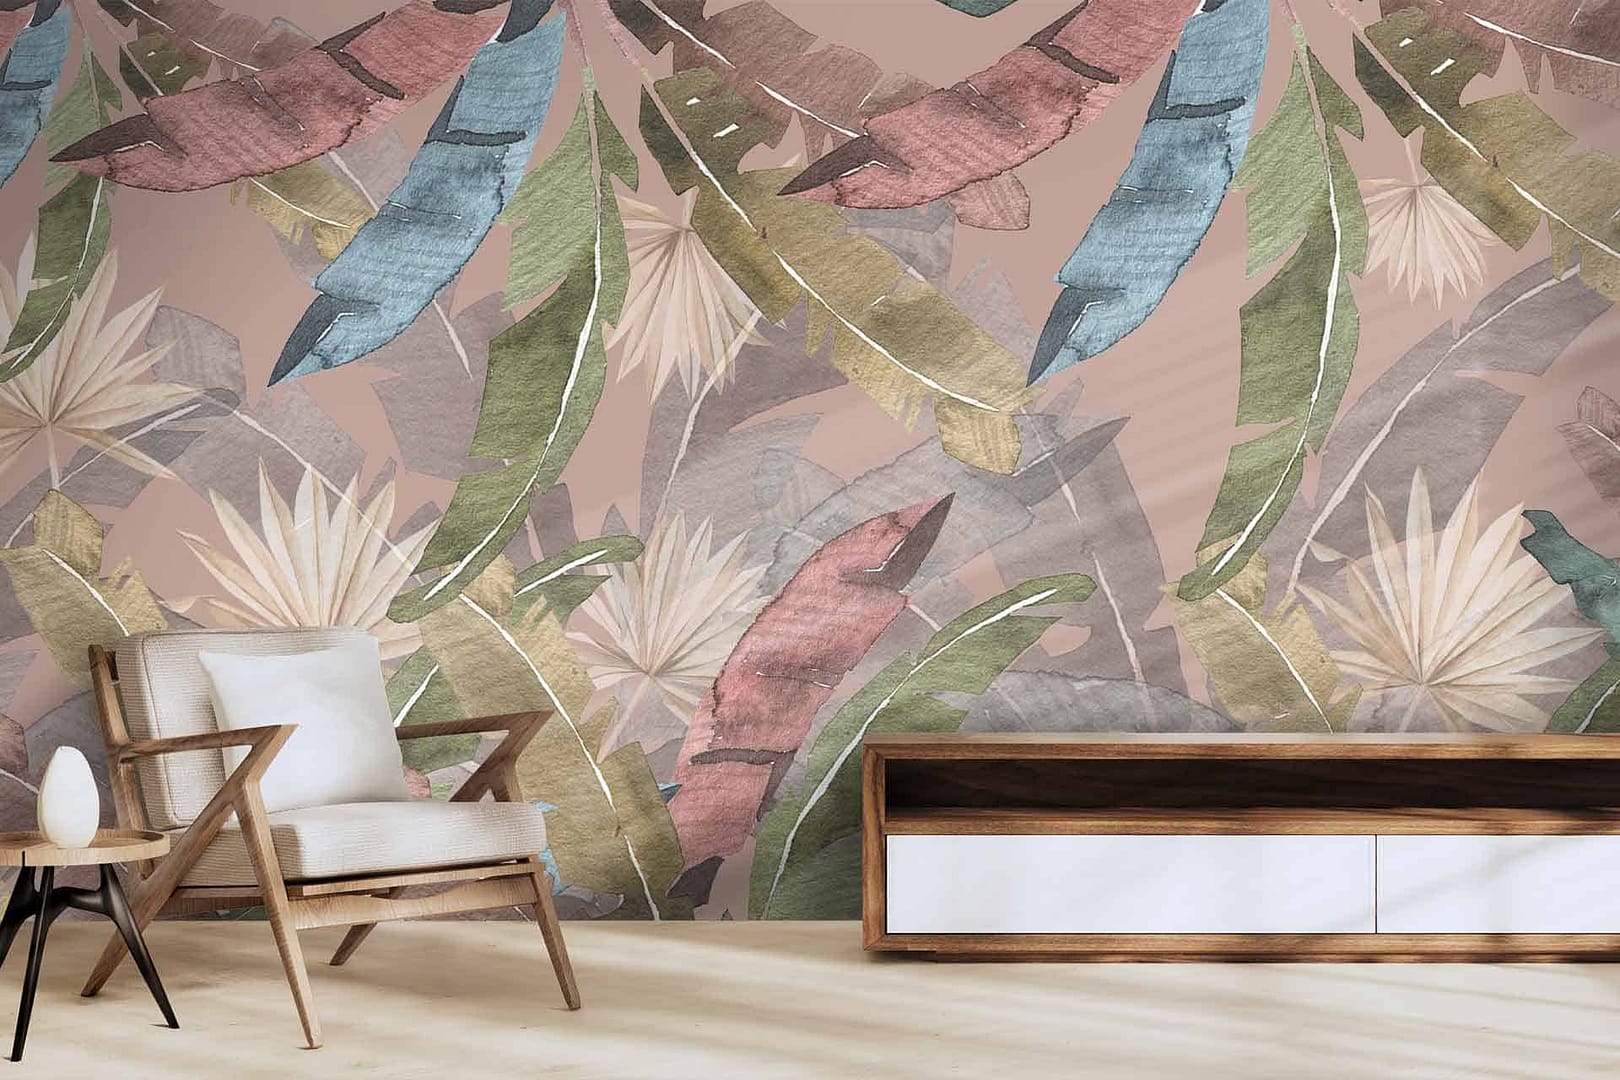 Lighter Shade Of Pale - a wallpaper made up of colourful leaves with a muted version in the background by Cara Saven Wall Design